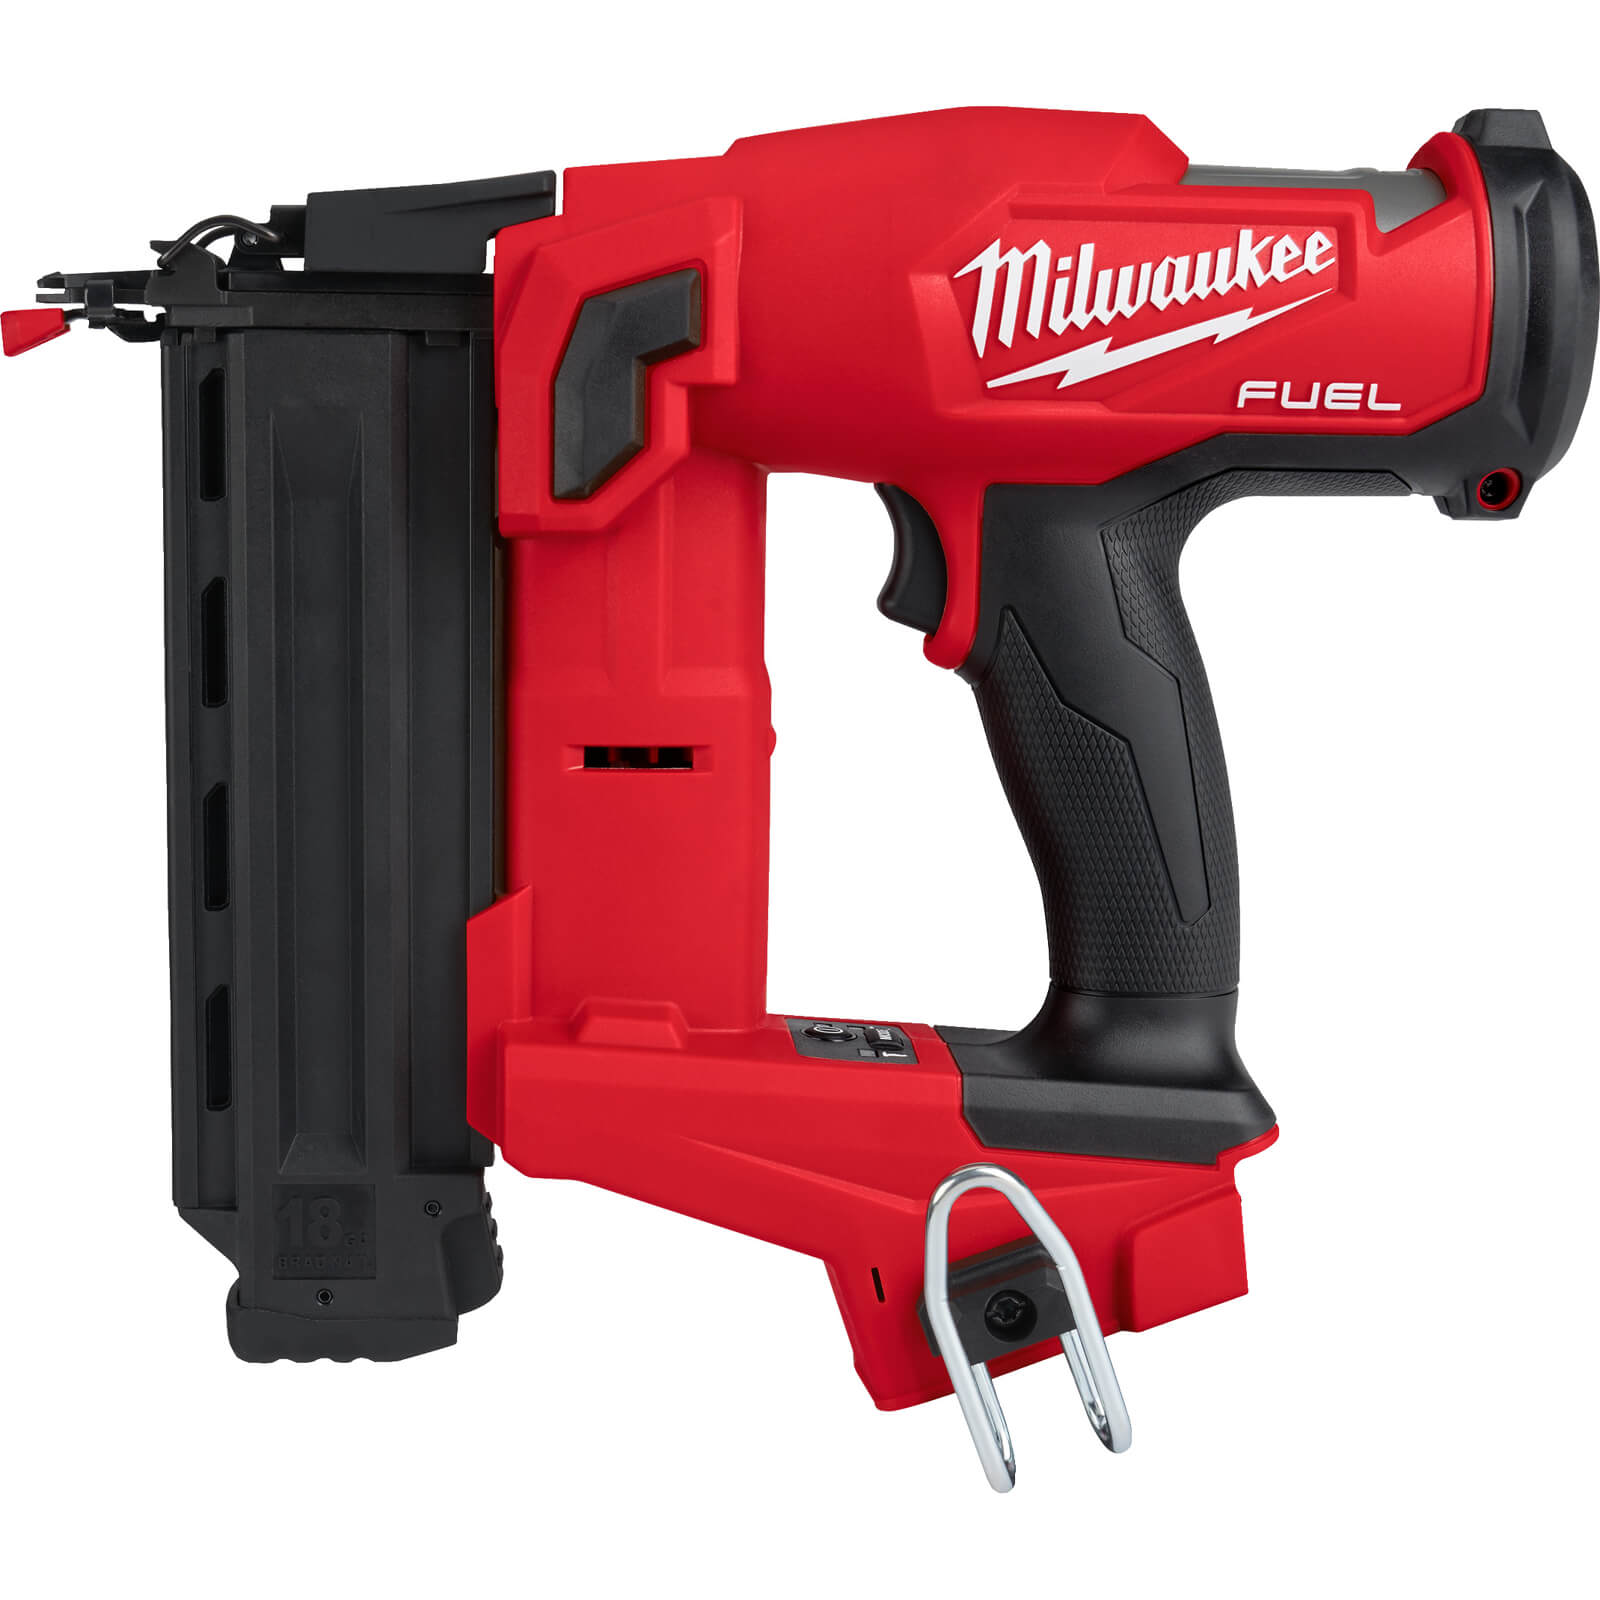 Image of Milwaukee M18 FN18GS Fuel 18v Cordless Brushless 18 Gauge Finish Nail Gun No Batteries No Charger Case